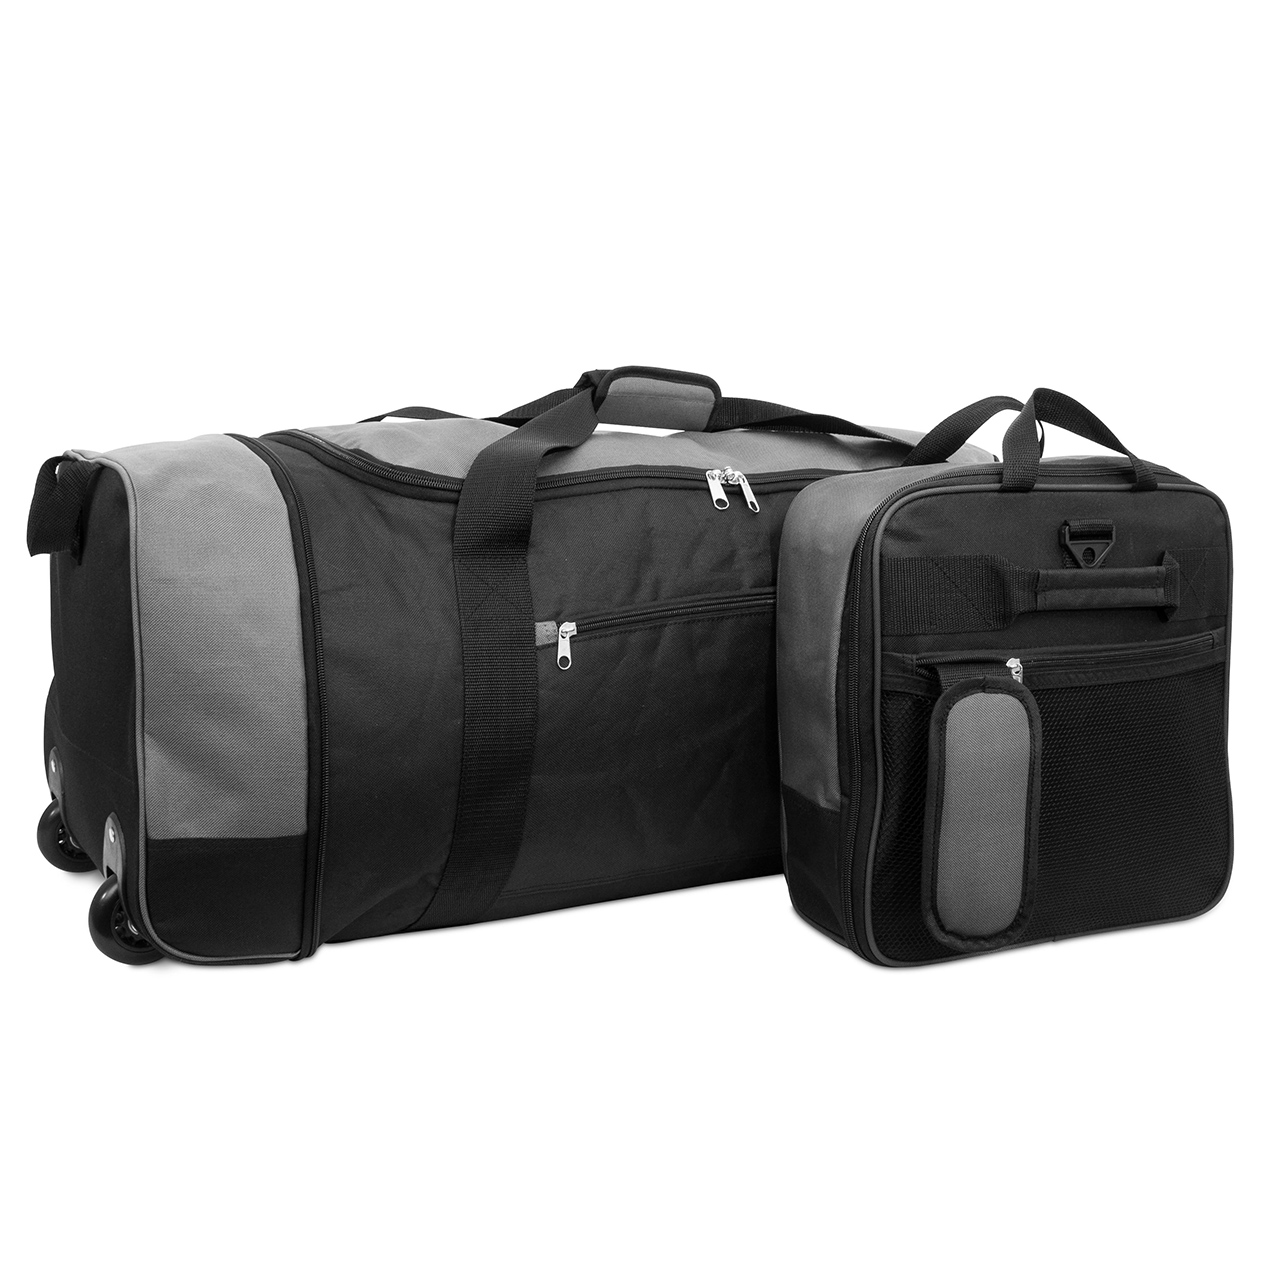 Large Travel Bag with Wheels